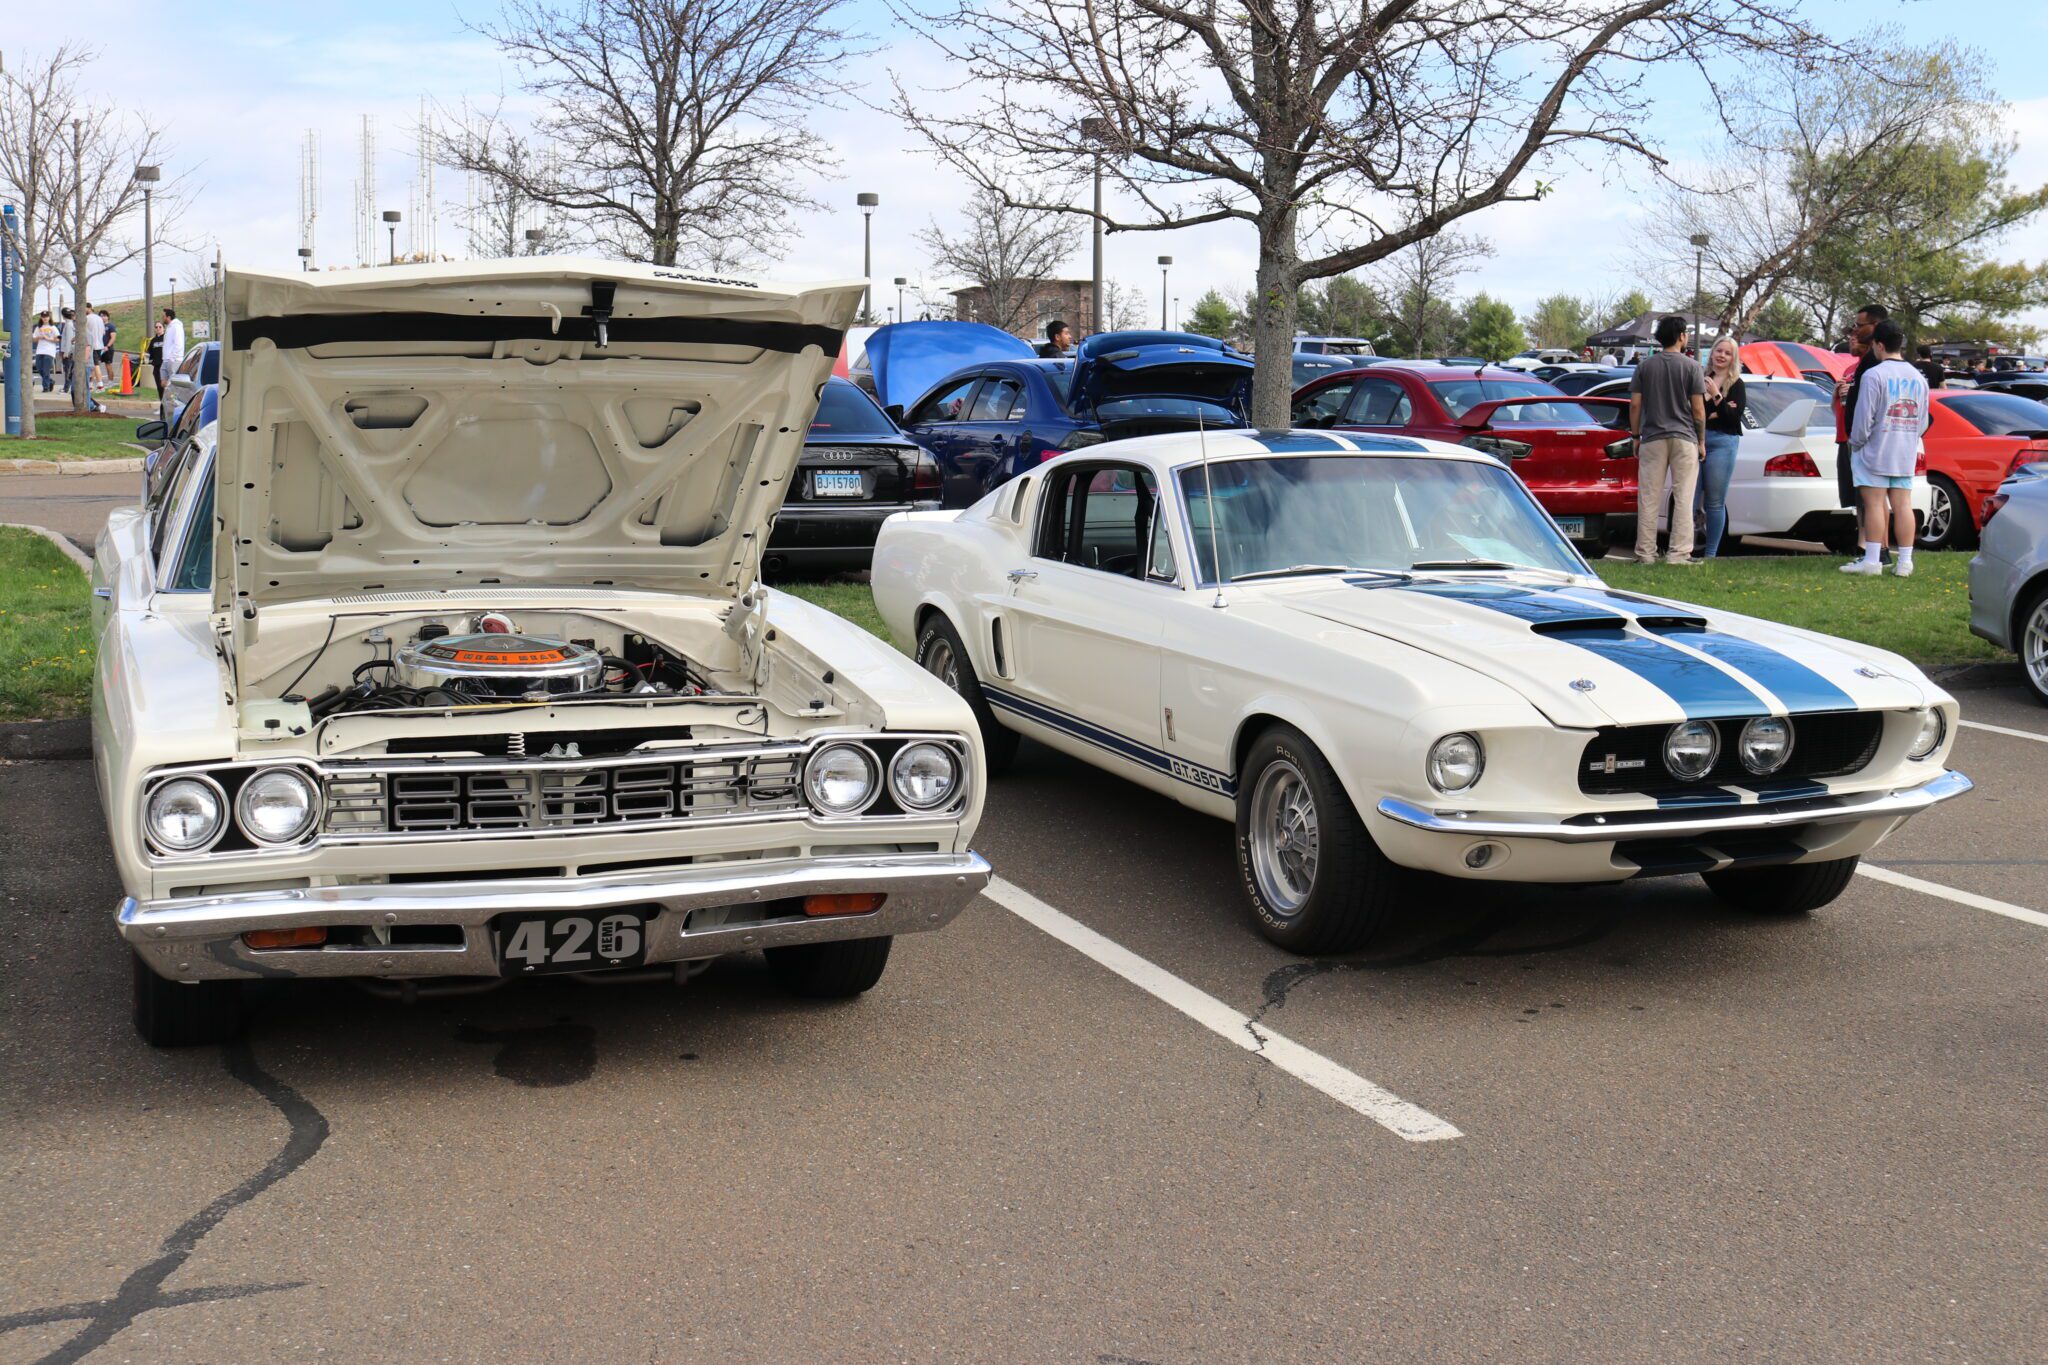 Quinnipiac Car Club Spring Show Attracts A Crowd (with Video)